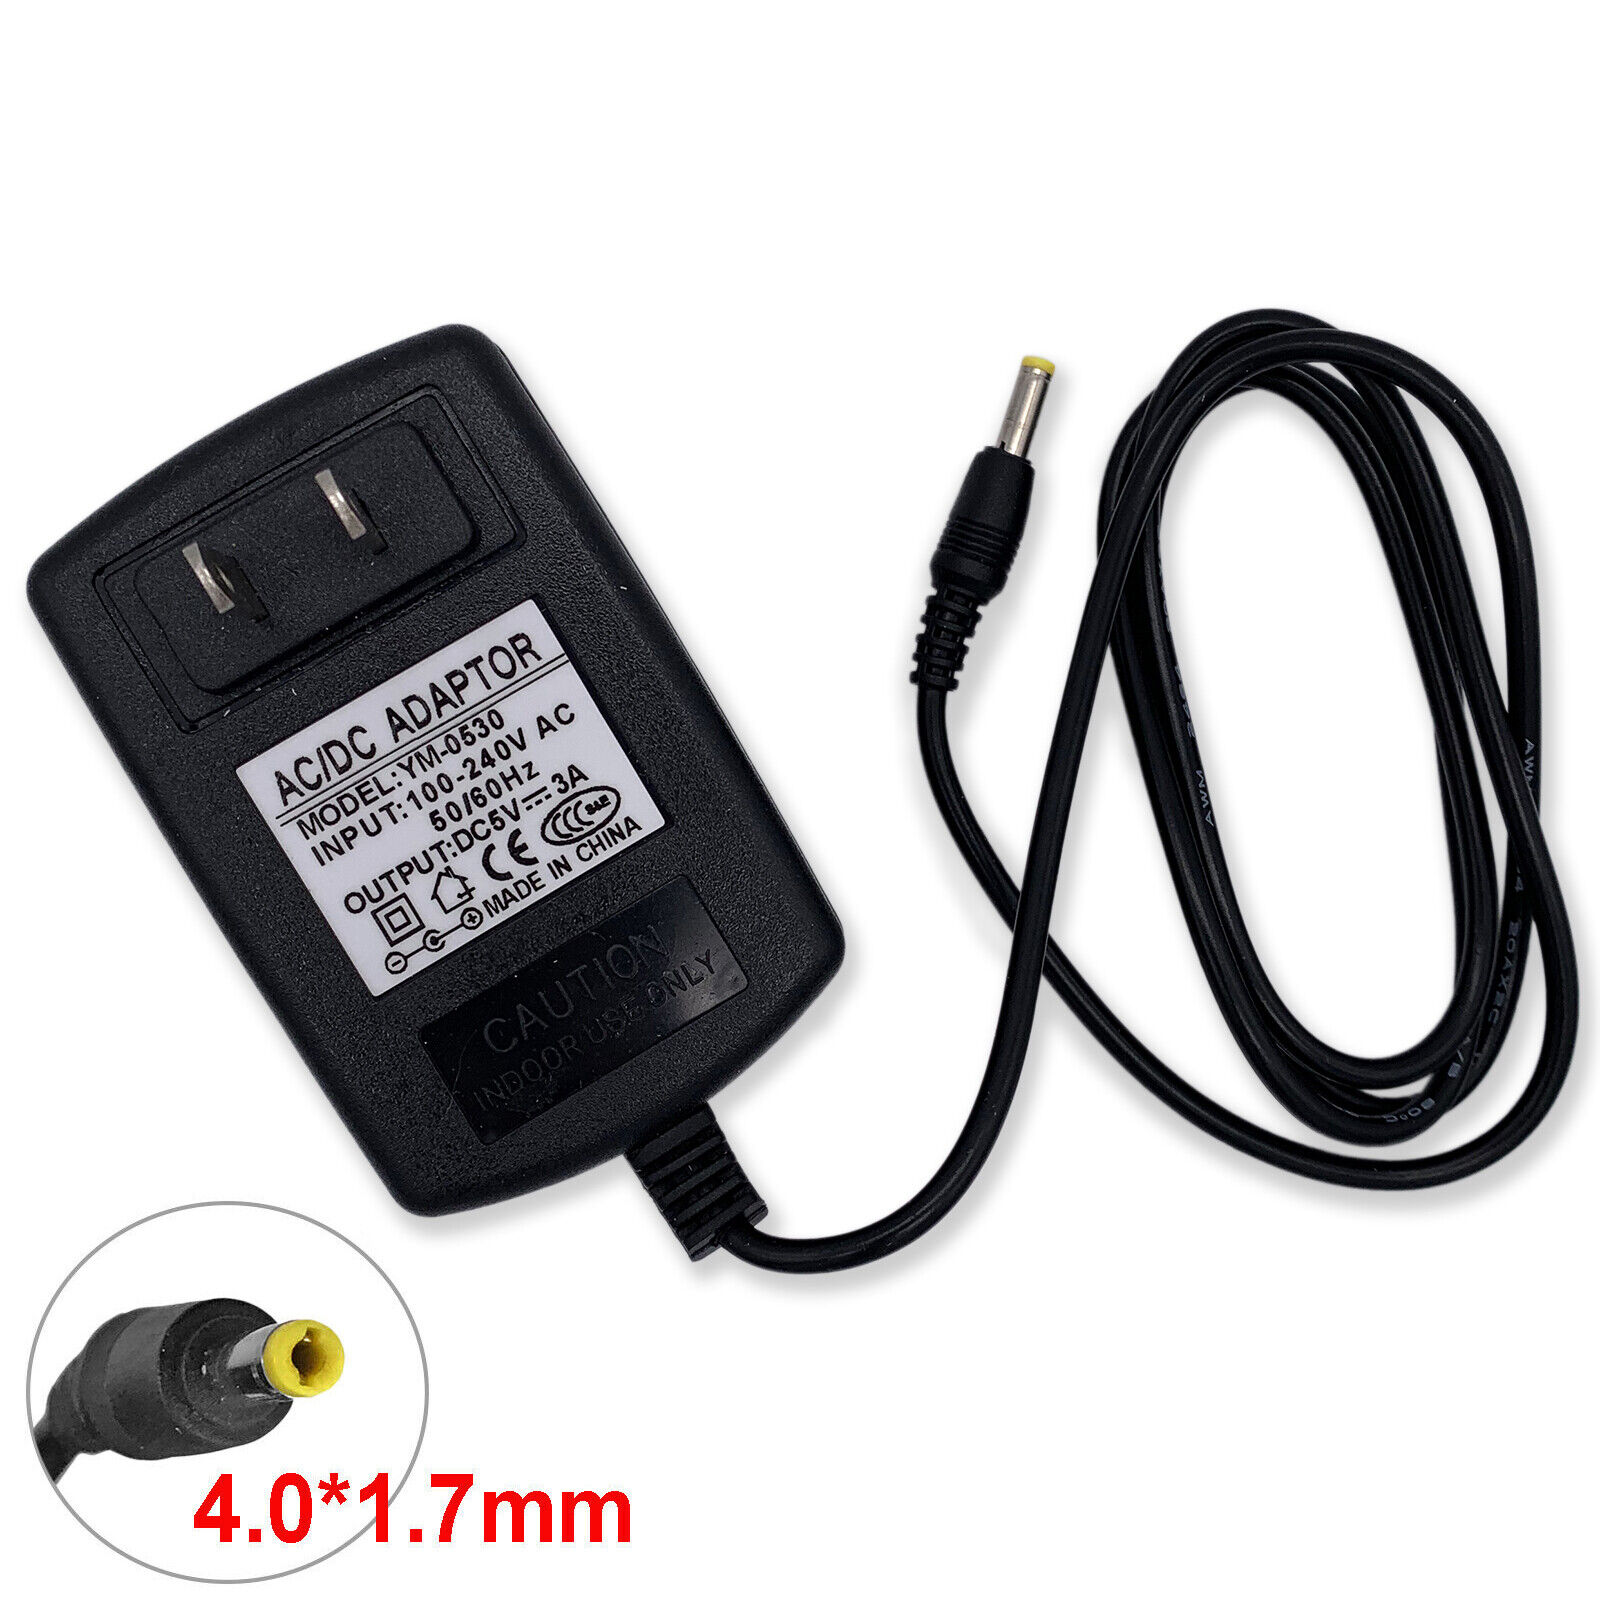 5V 3A AC Home Wall Power Adapter W/ 4.0*1.7mm Cord For Internet Wireless Router